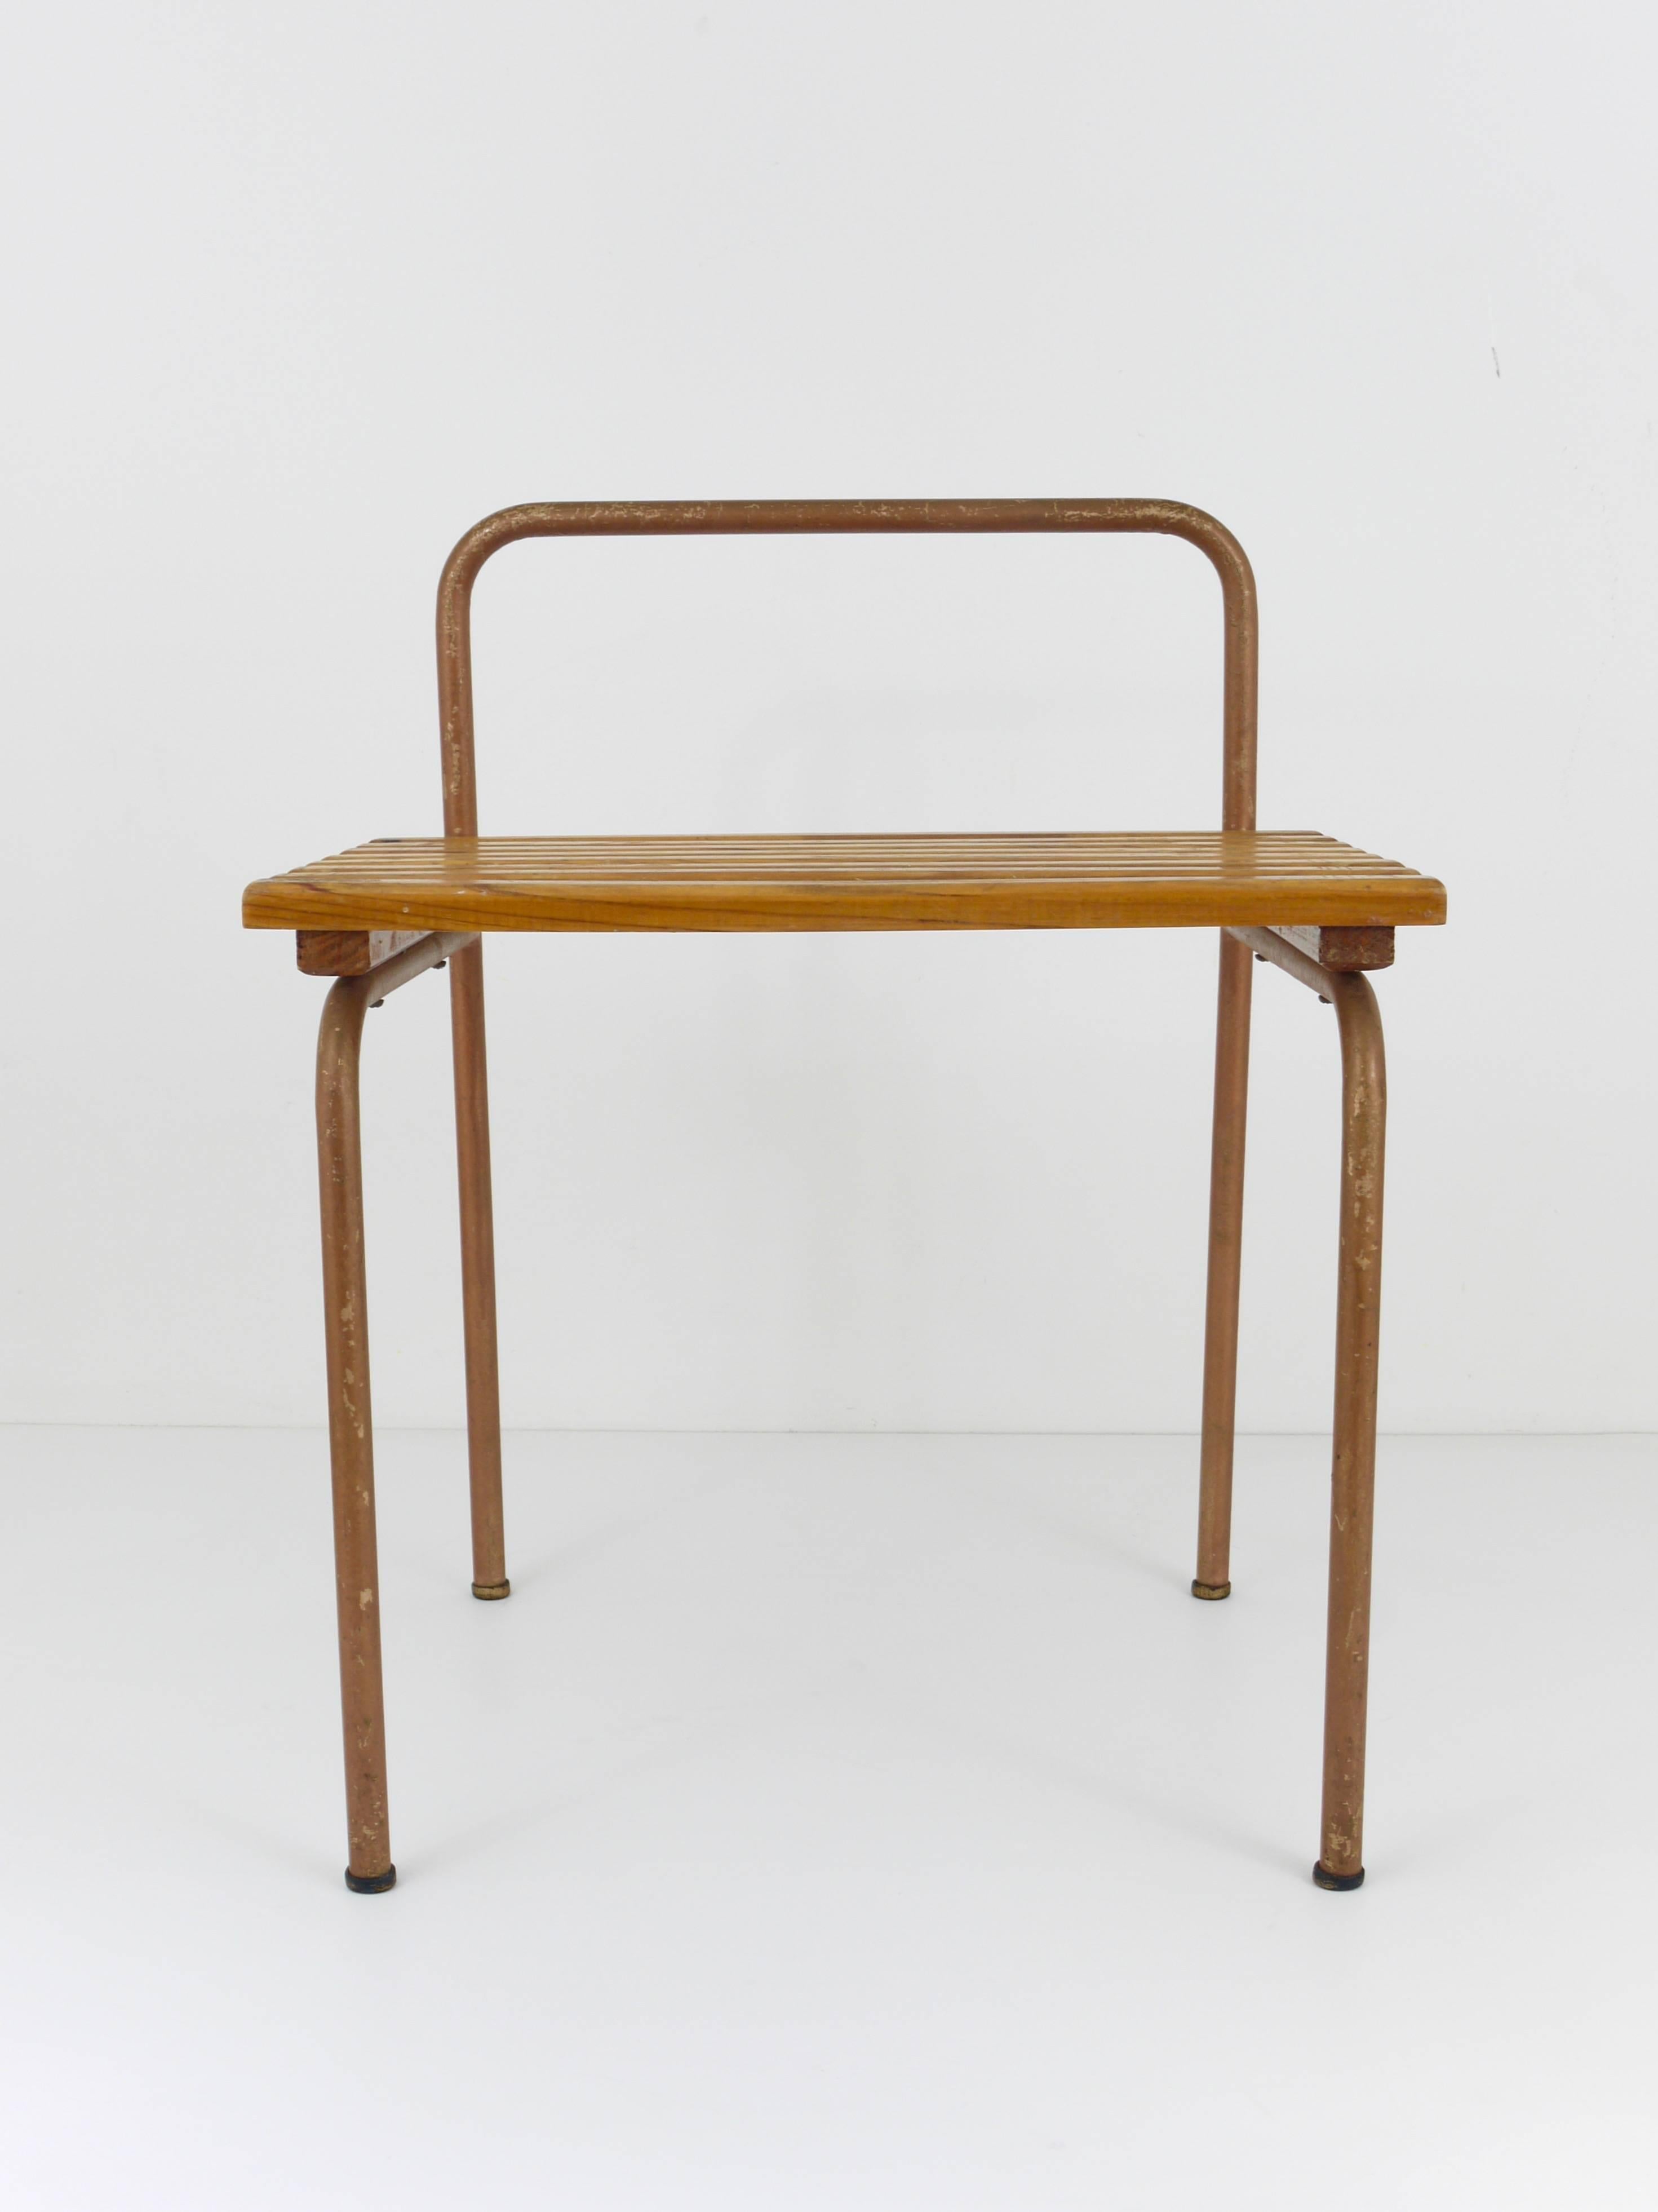 A beautiful Mid-Century luggage stand from the 1950s by Charlotte Perriand, executed by Les Arcs, France. Made of tubular steel and wood, in good condition with charming patina. Could also be used as small bench or side table.